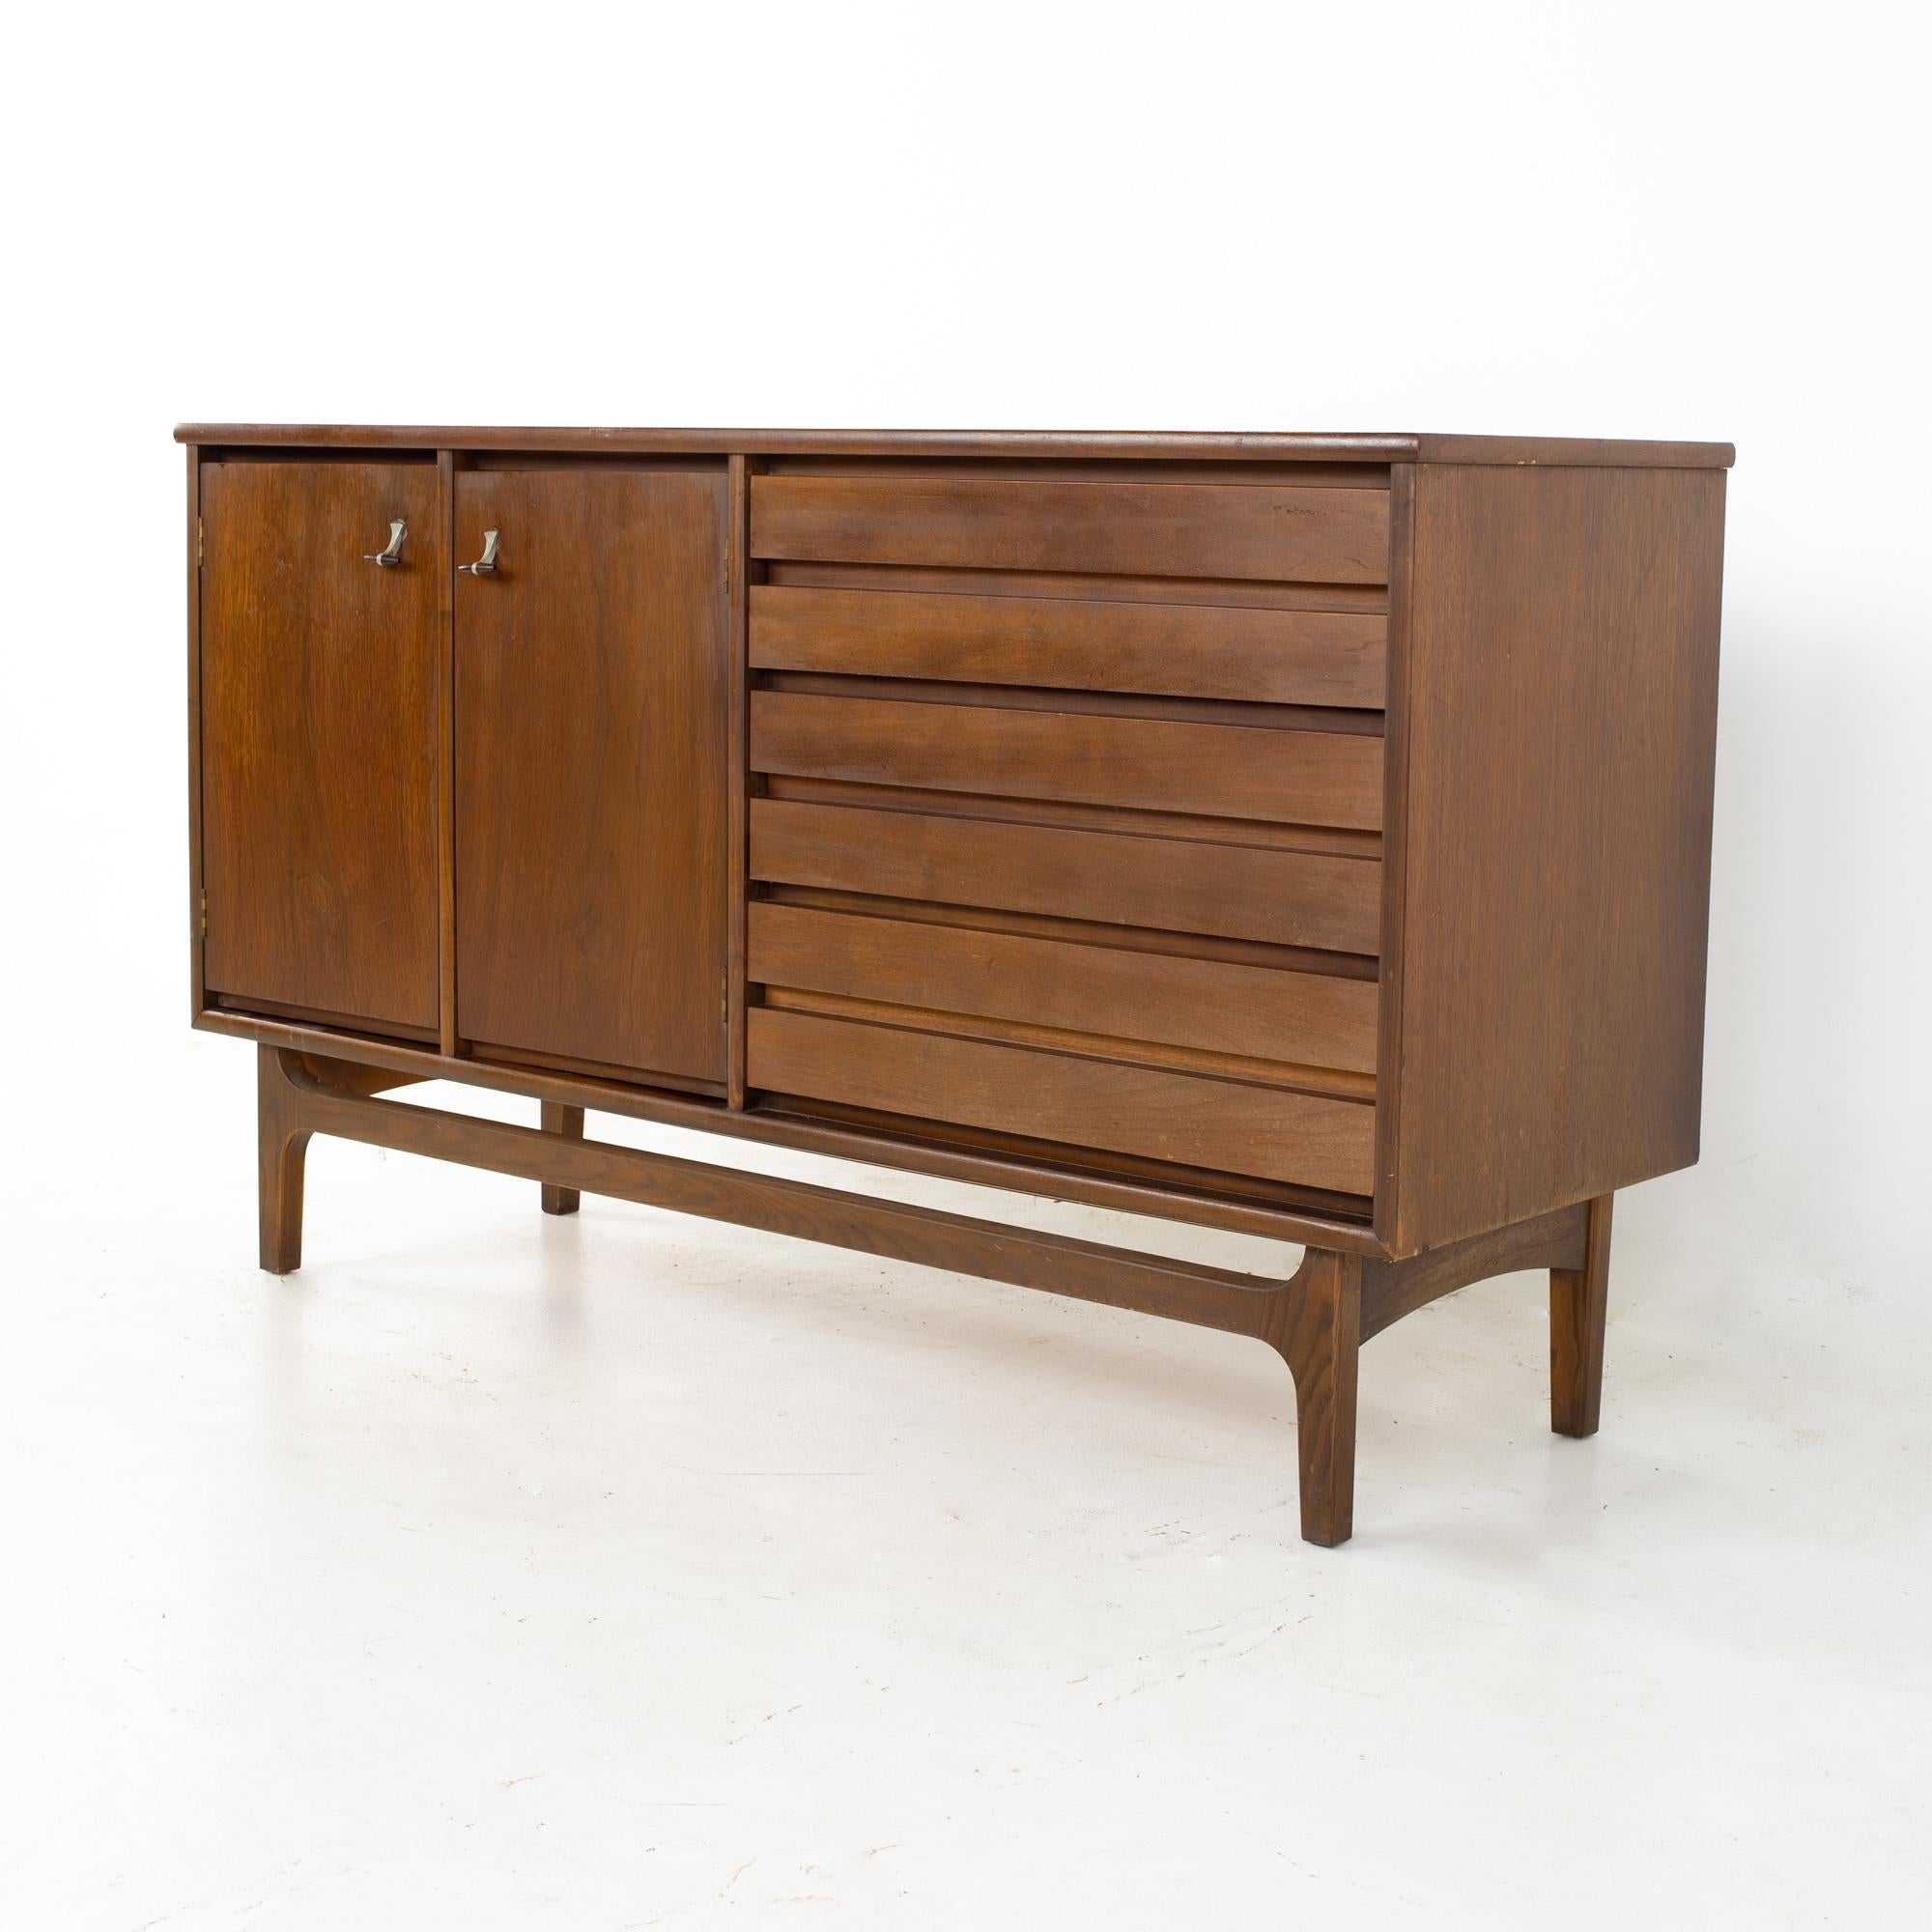 Stanley mid century walnut sideboard buffet credenza
Credenza measures: 54 wide x 18 deep x 32 inches high

All pieces of furniture can be had in what we call restored vintage condition. That means the piece is restored upon purchase so it’s free